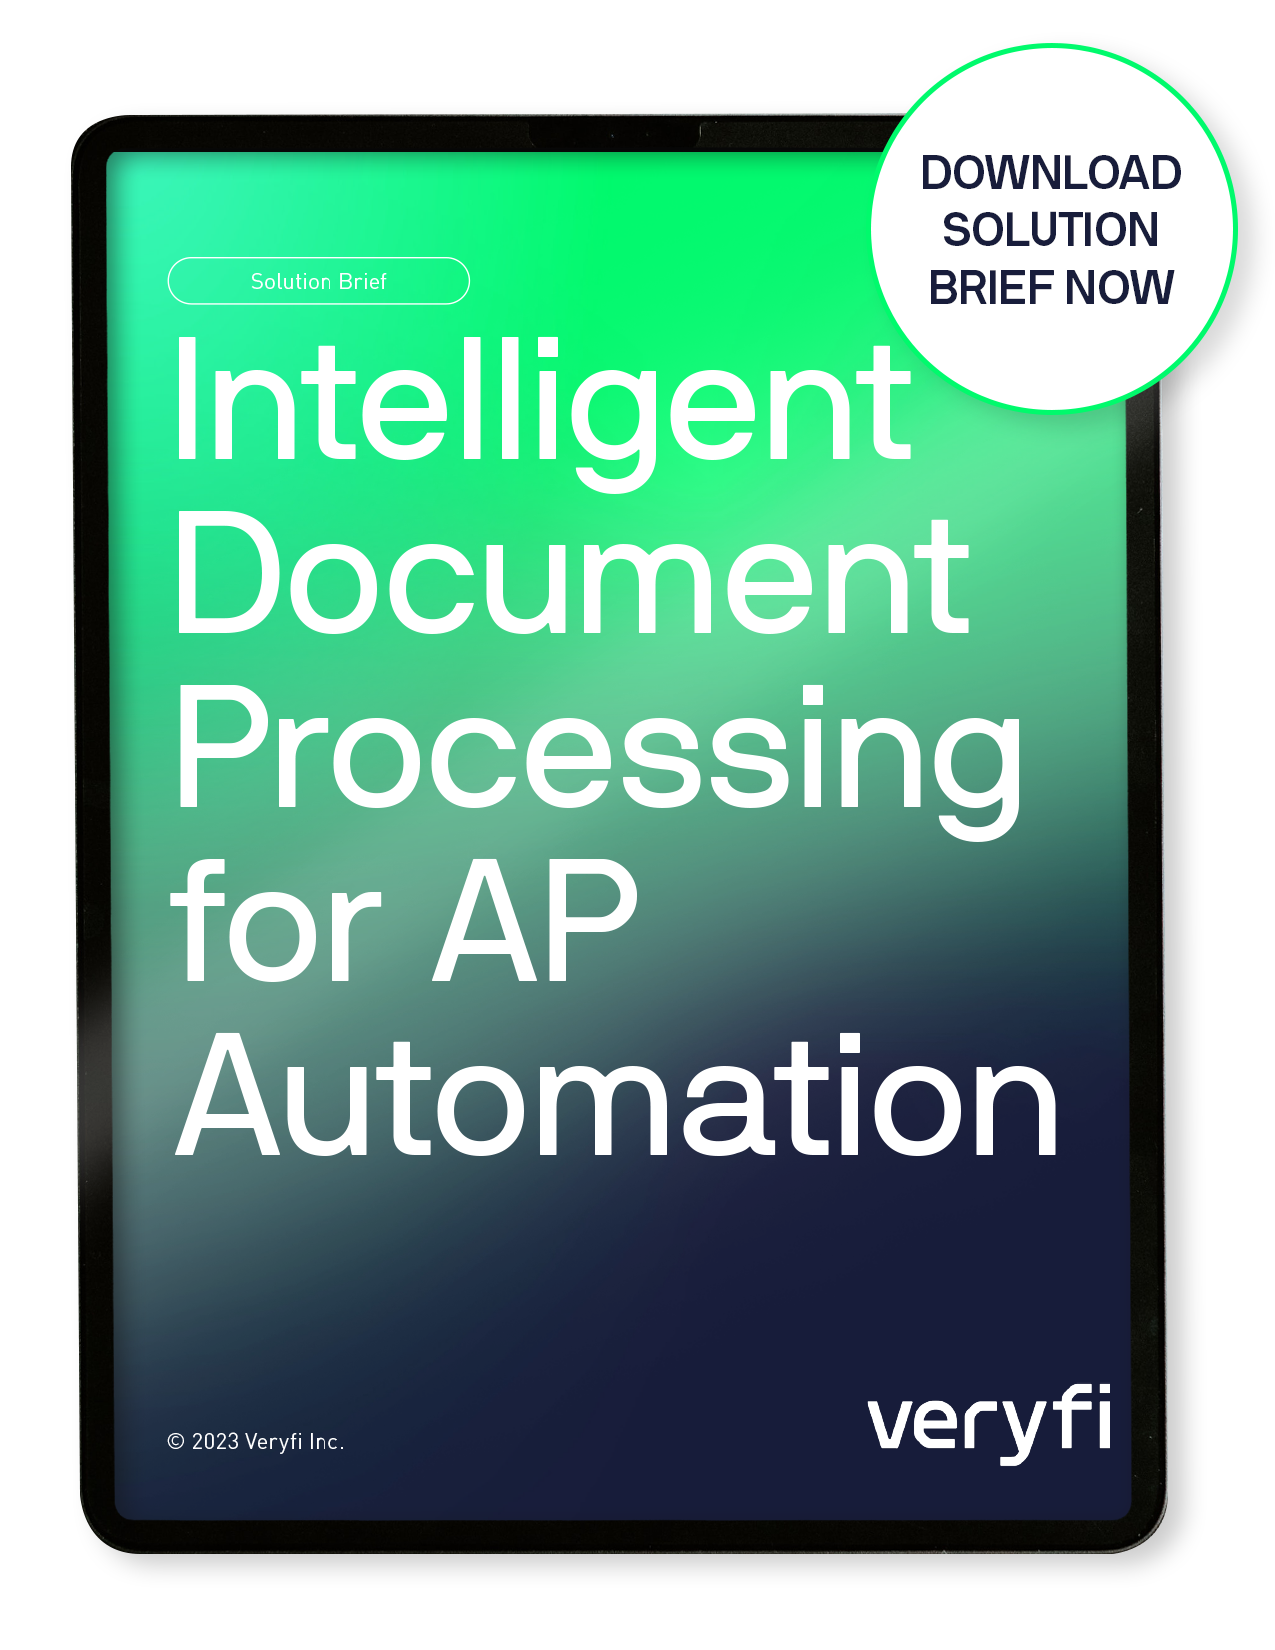 Intelligent Document Processing for AP Automation